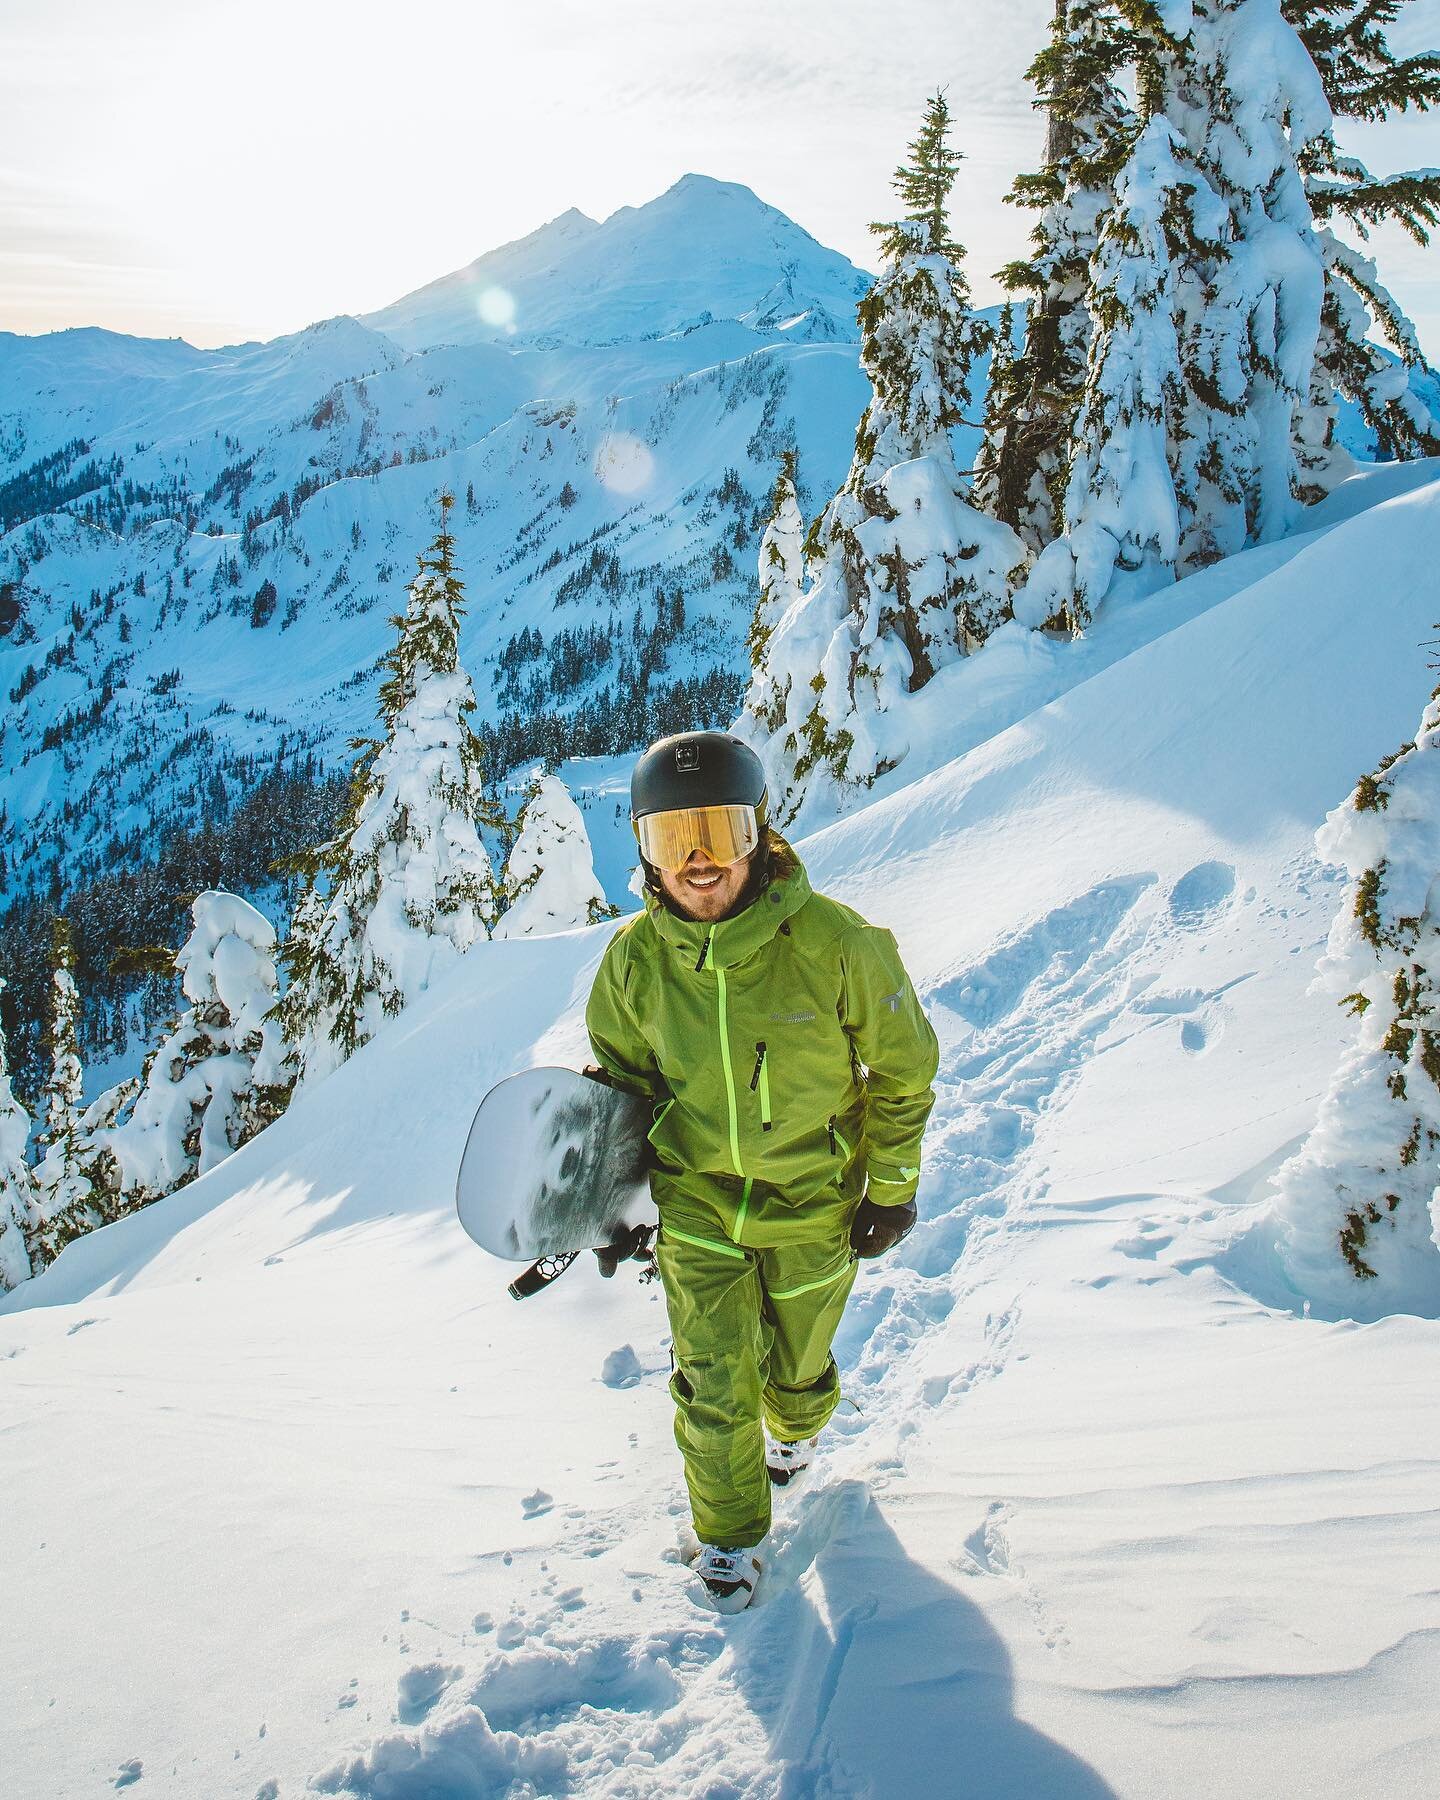 #ad Story time with @columbia1938: Growing up snowboarding in Minnesota, we definitely had plenty of snow and cold, but not much in the way of mountains. We had hills - tiny hills - but somehow spent more time on the lifts than riding. Still, we love